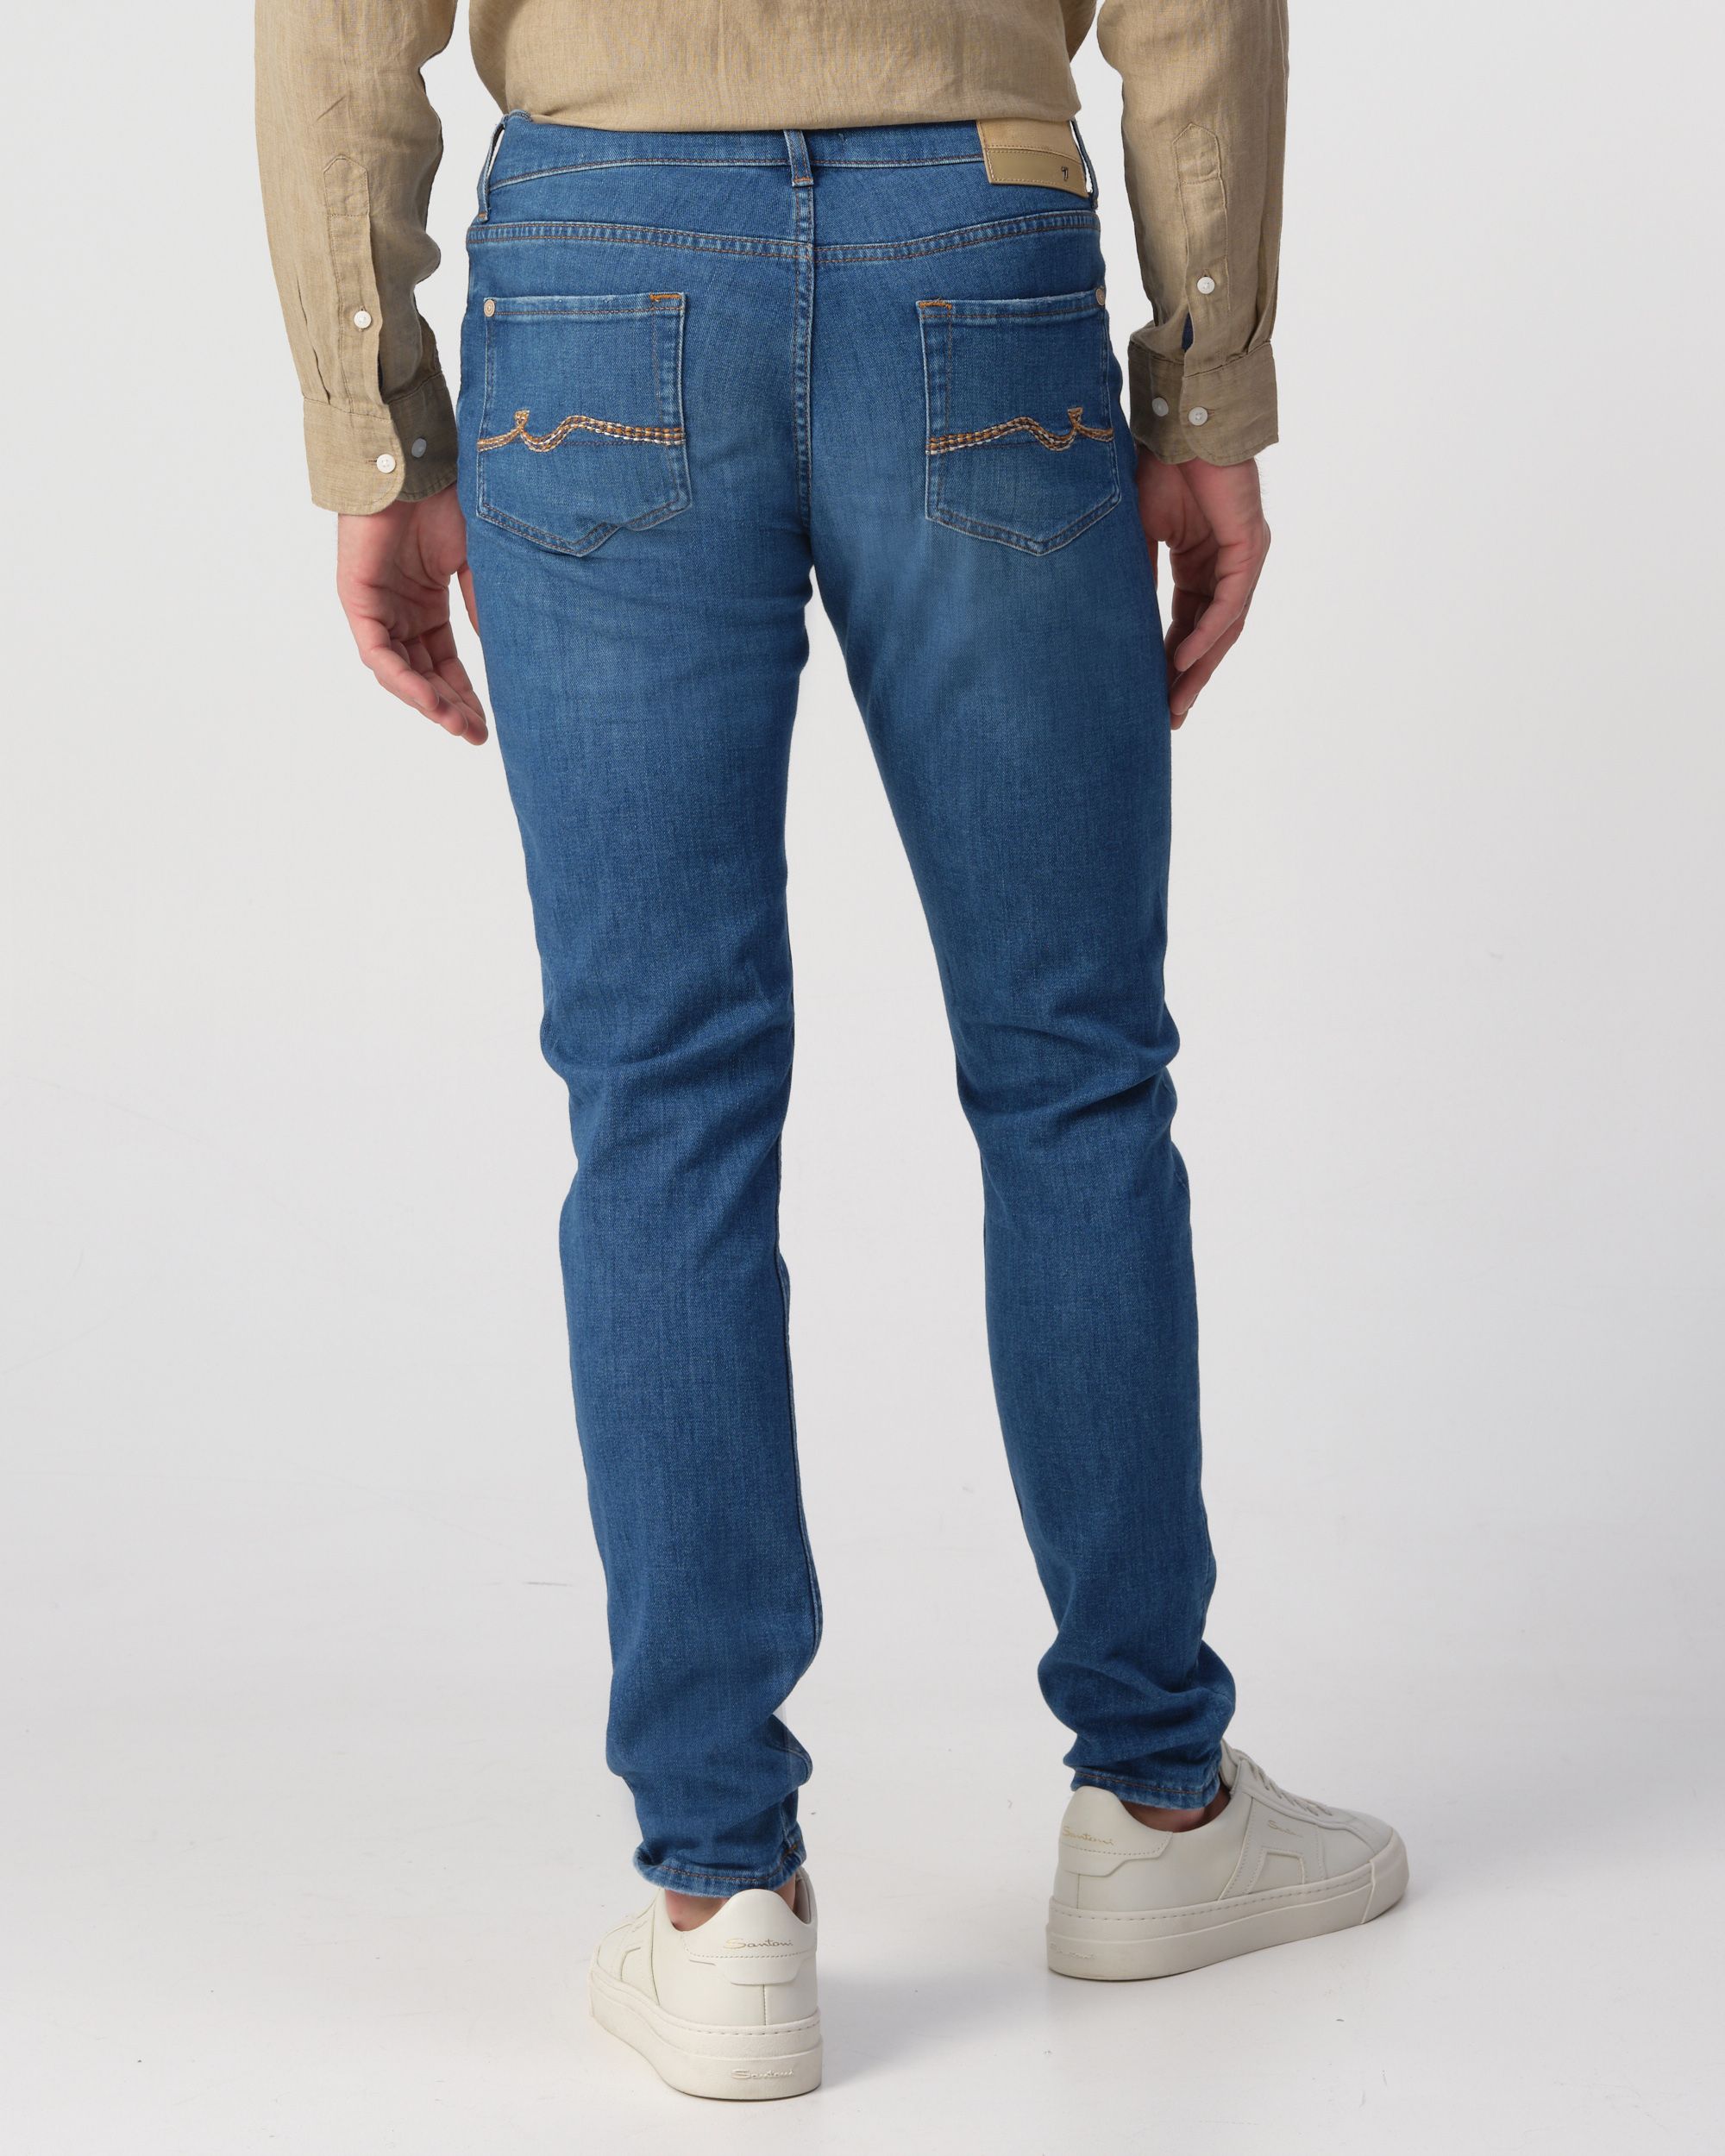 Seven for all mankind Slimmy Tapered Jeans Blauw 094721-001-30